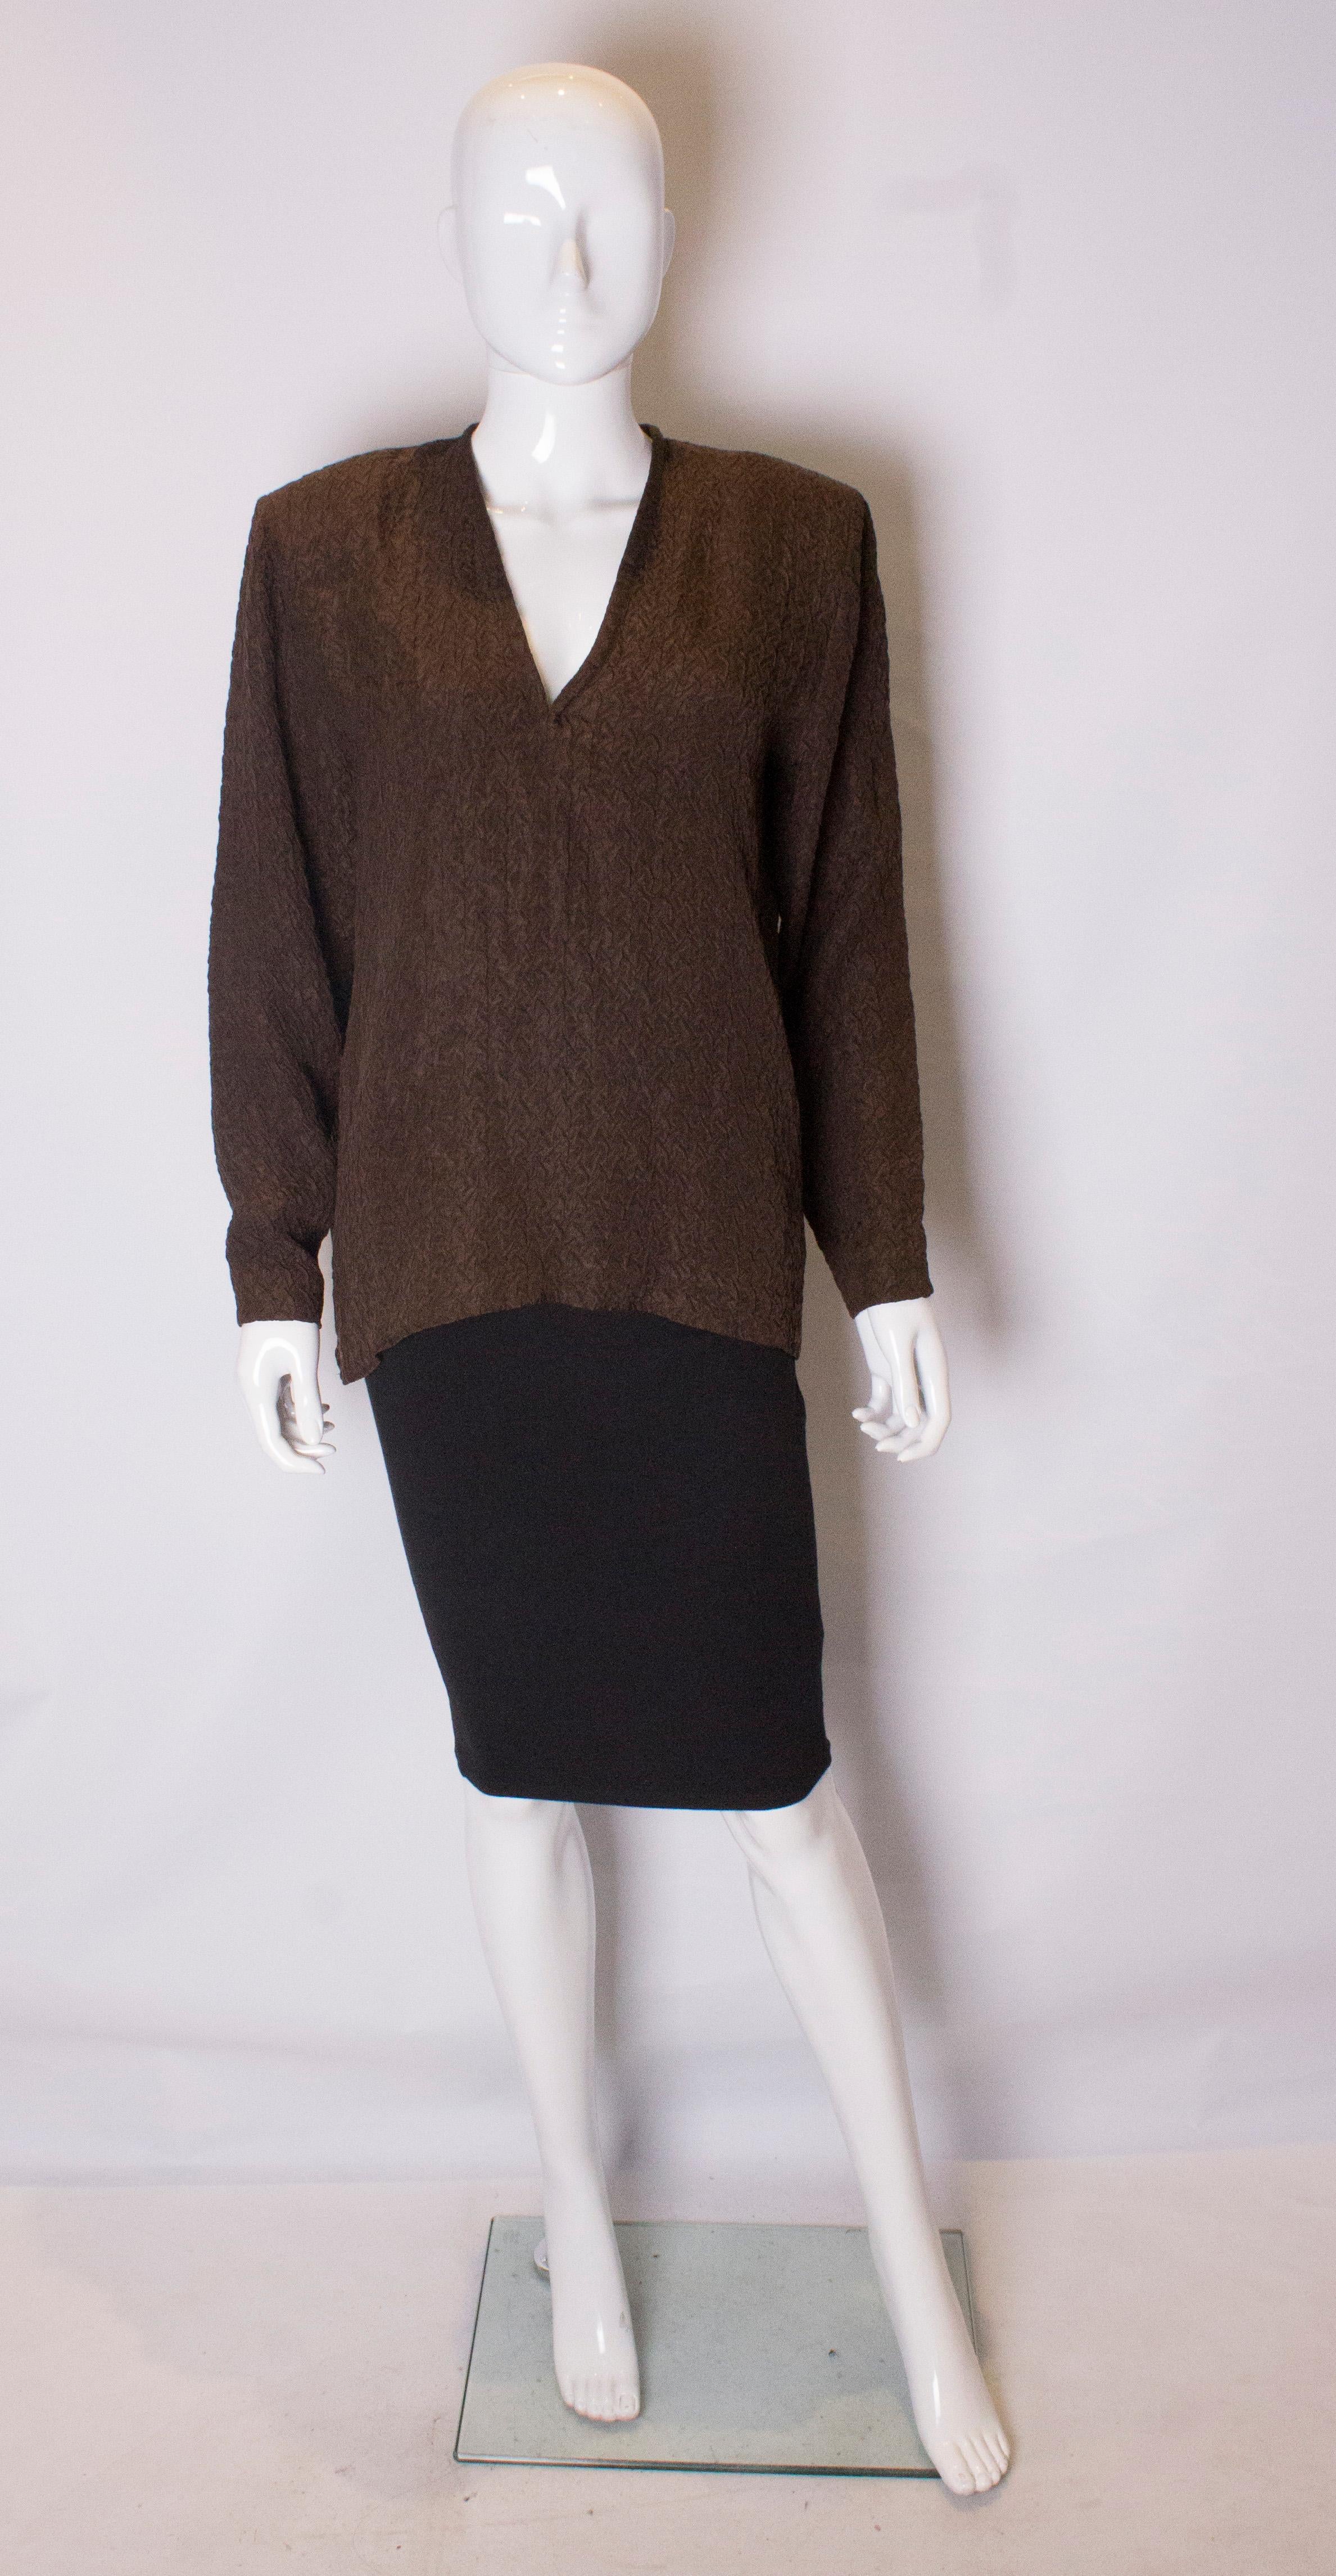 A great silk blouse by Yves Saint Laurent rive Gauche line . In a brown textured crinkle silk, the blouse has a v neckline and small shoulder pads.